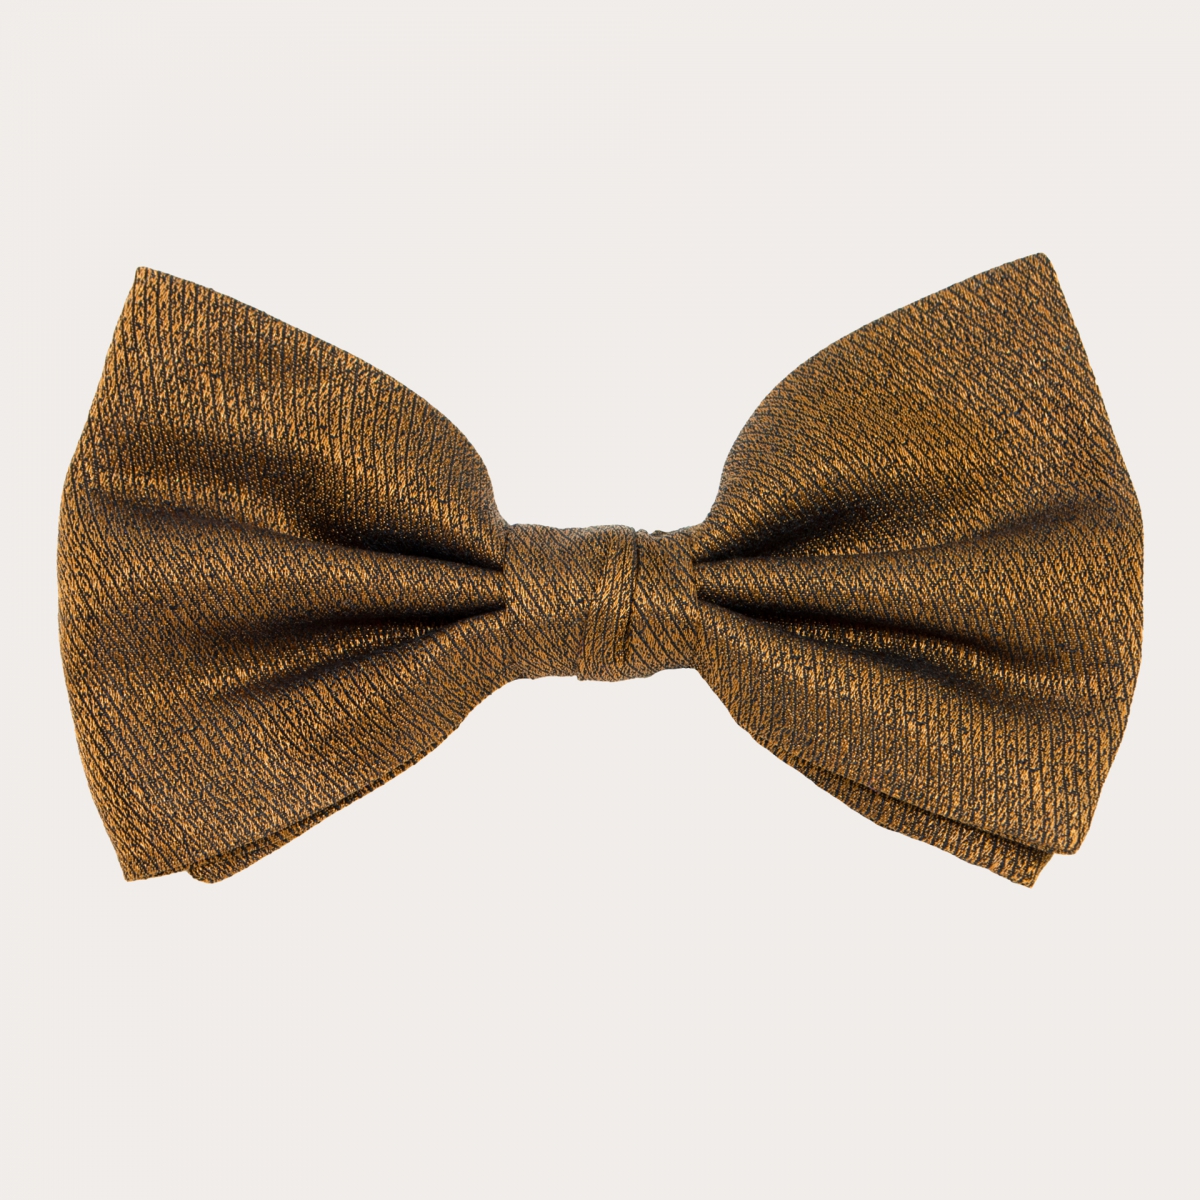 BRUCLE Jacquard silk thin suspenders with matching bow tie, iridescent gold